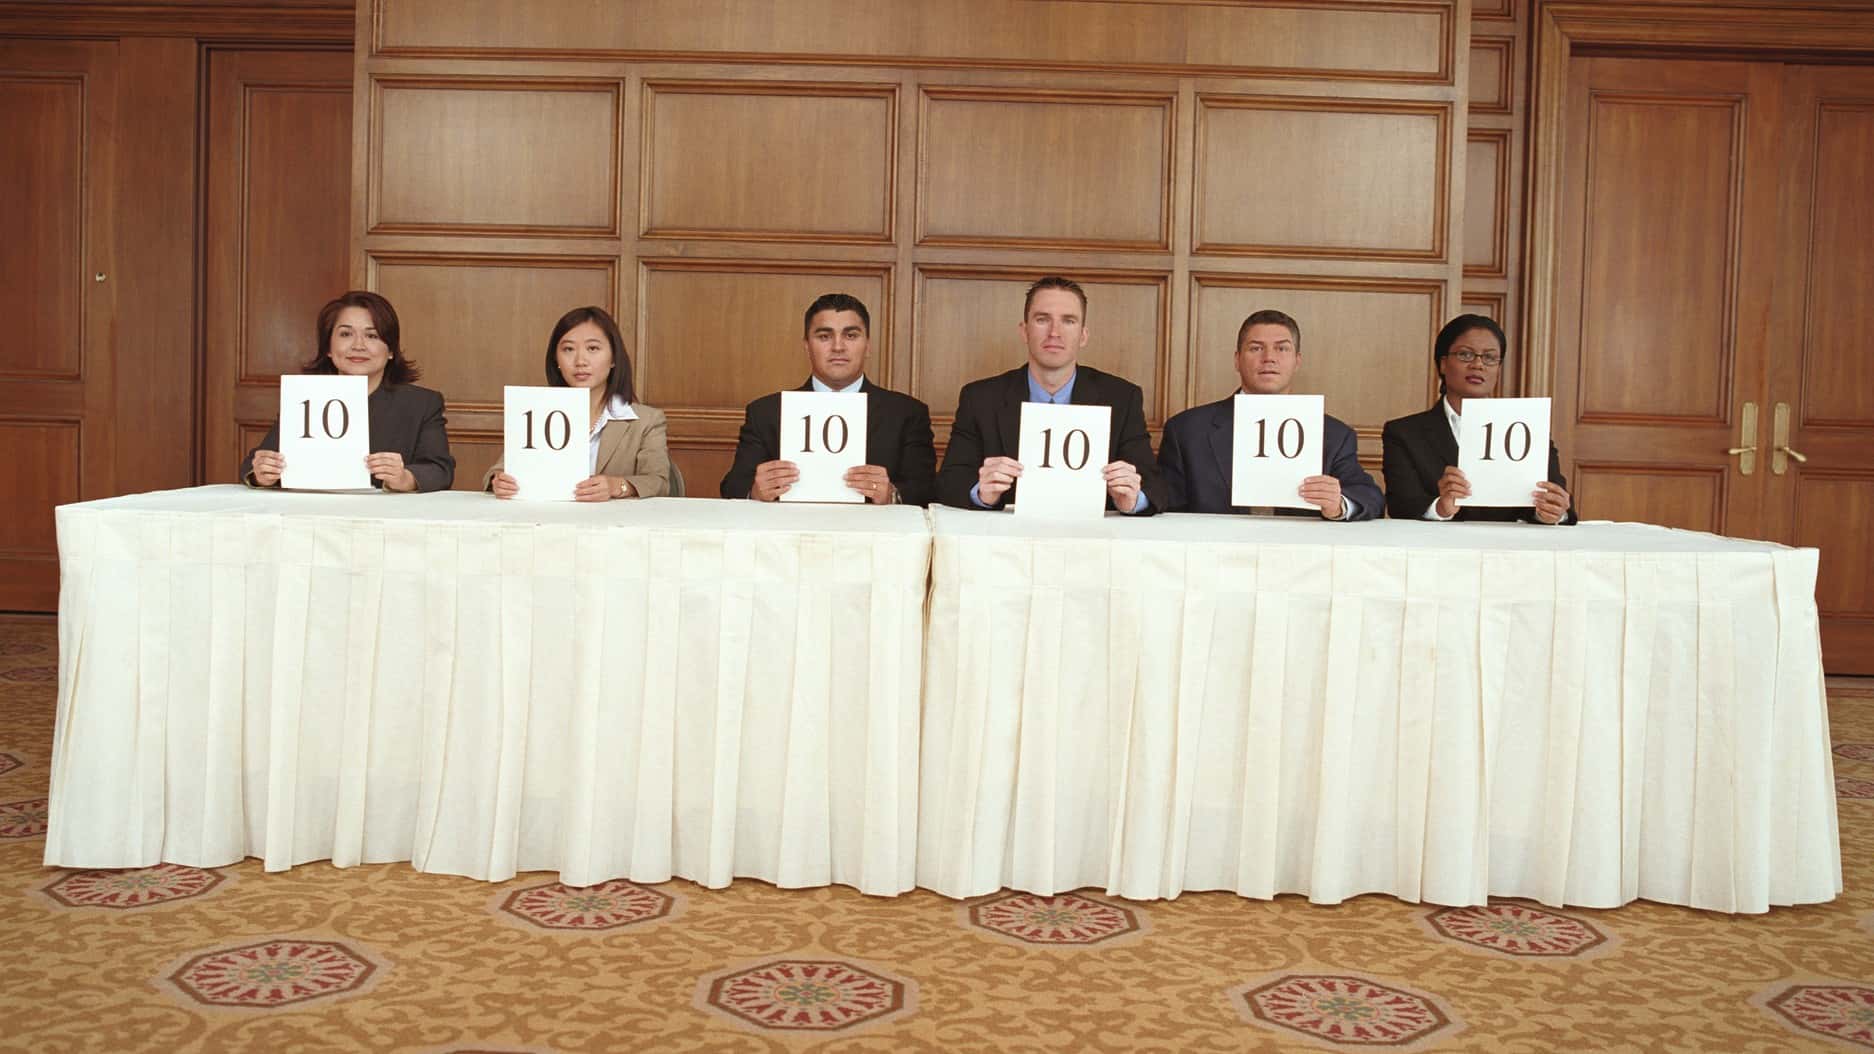 An old-fashioned panel of judges each holding a card with the number 10